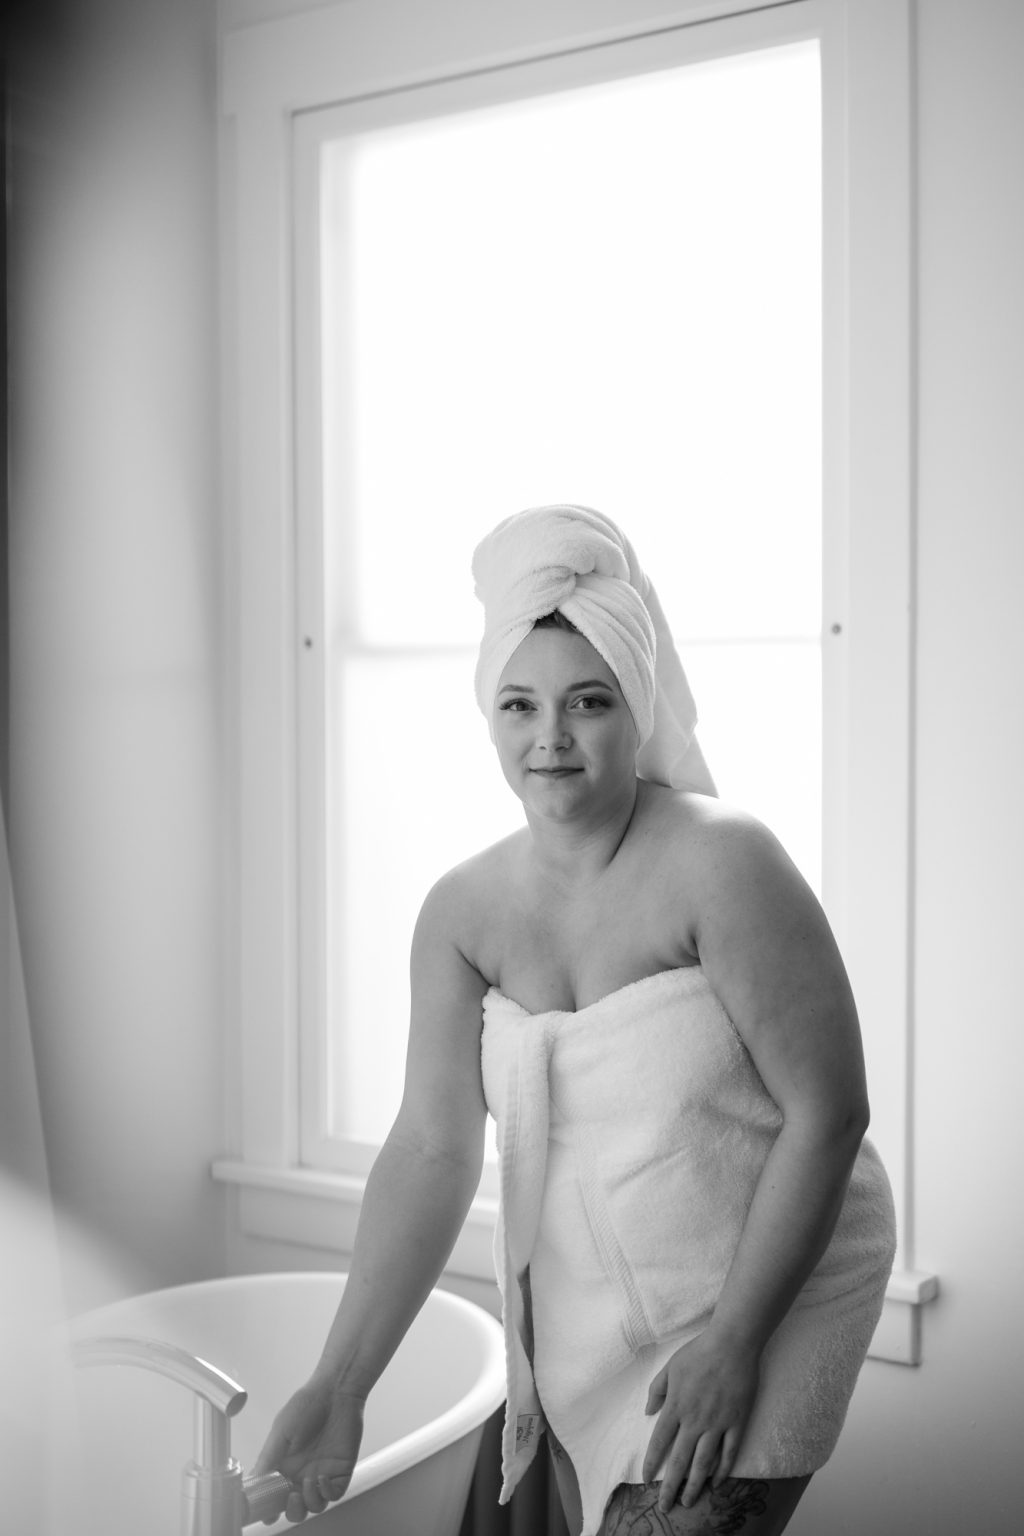 https://lilacandfernphotography.com/wp-content/uploads/2022/03/Boudoir-Fort-Collins-Colorado-Lilac-and-Fern-AS-Tub-12-1024x1536.jpg